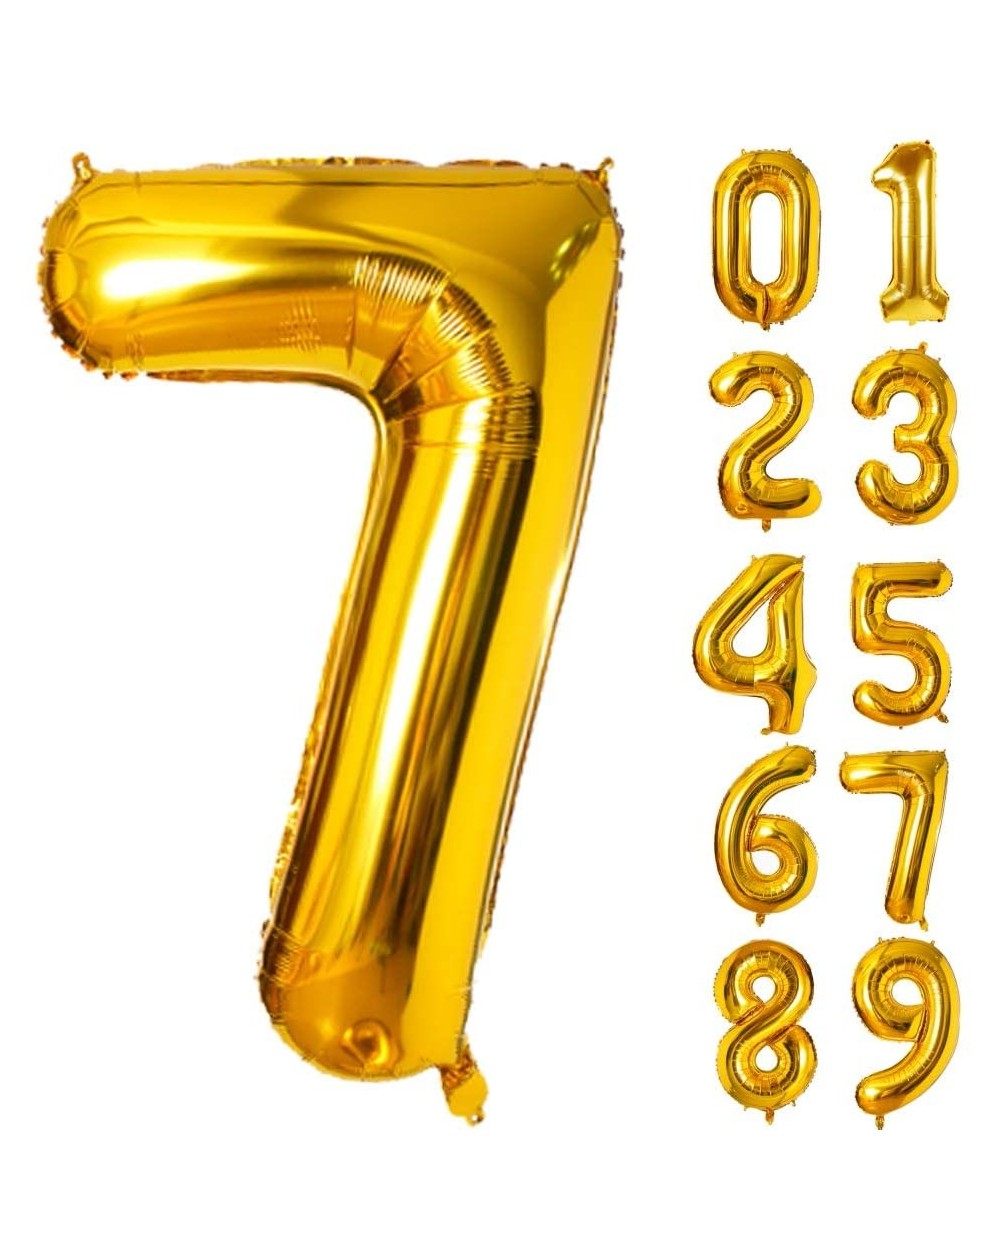 Balloons 40 Inch Gold Number Foil Balloons 0-9 Balloons- Foil Mylar Big Number 7 Digital Balloons for Gold Birthday Party Dec...